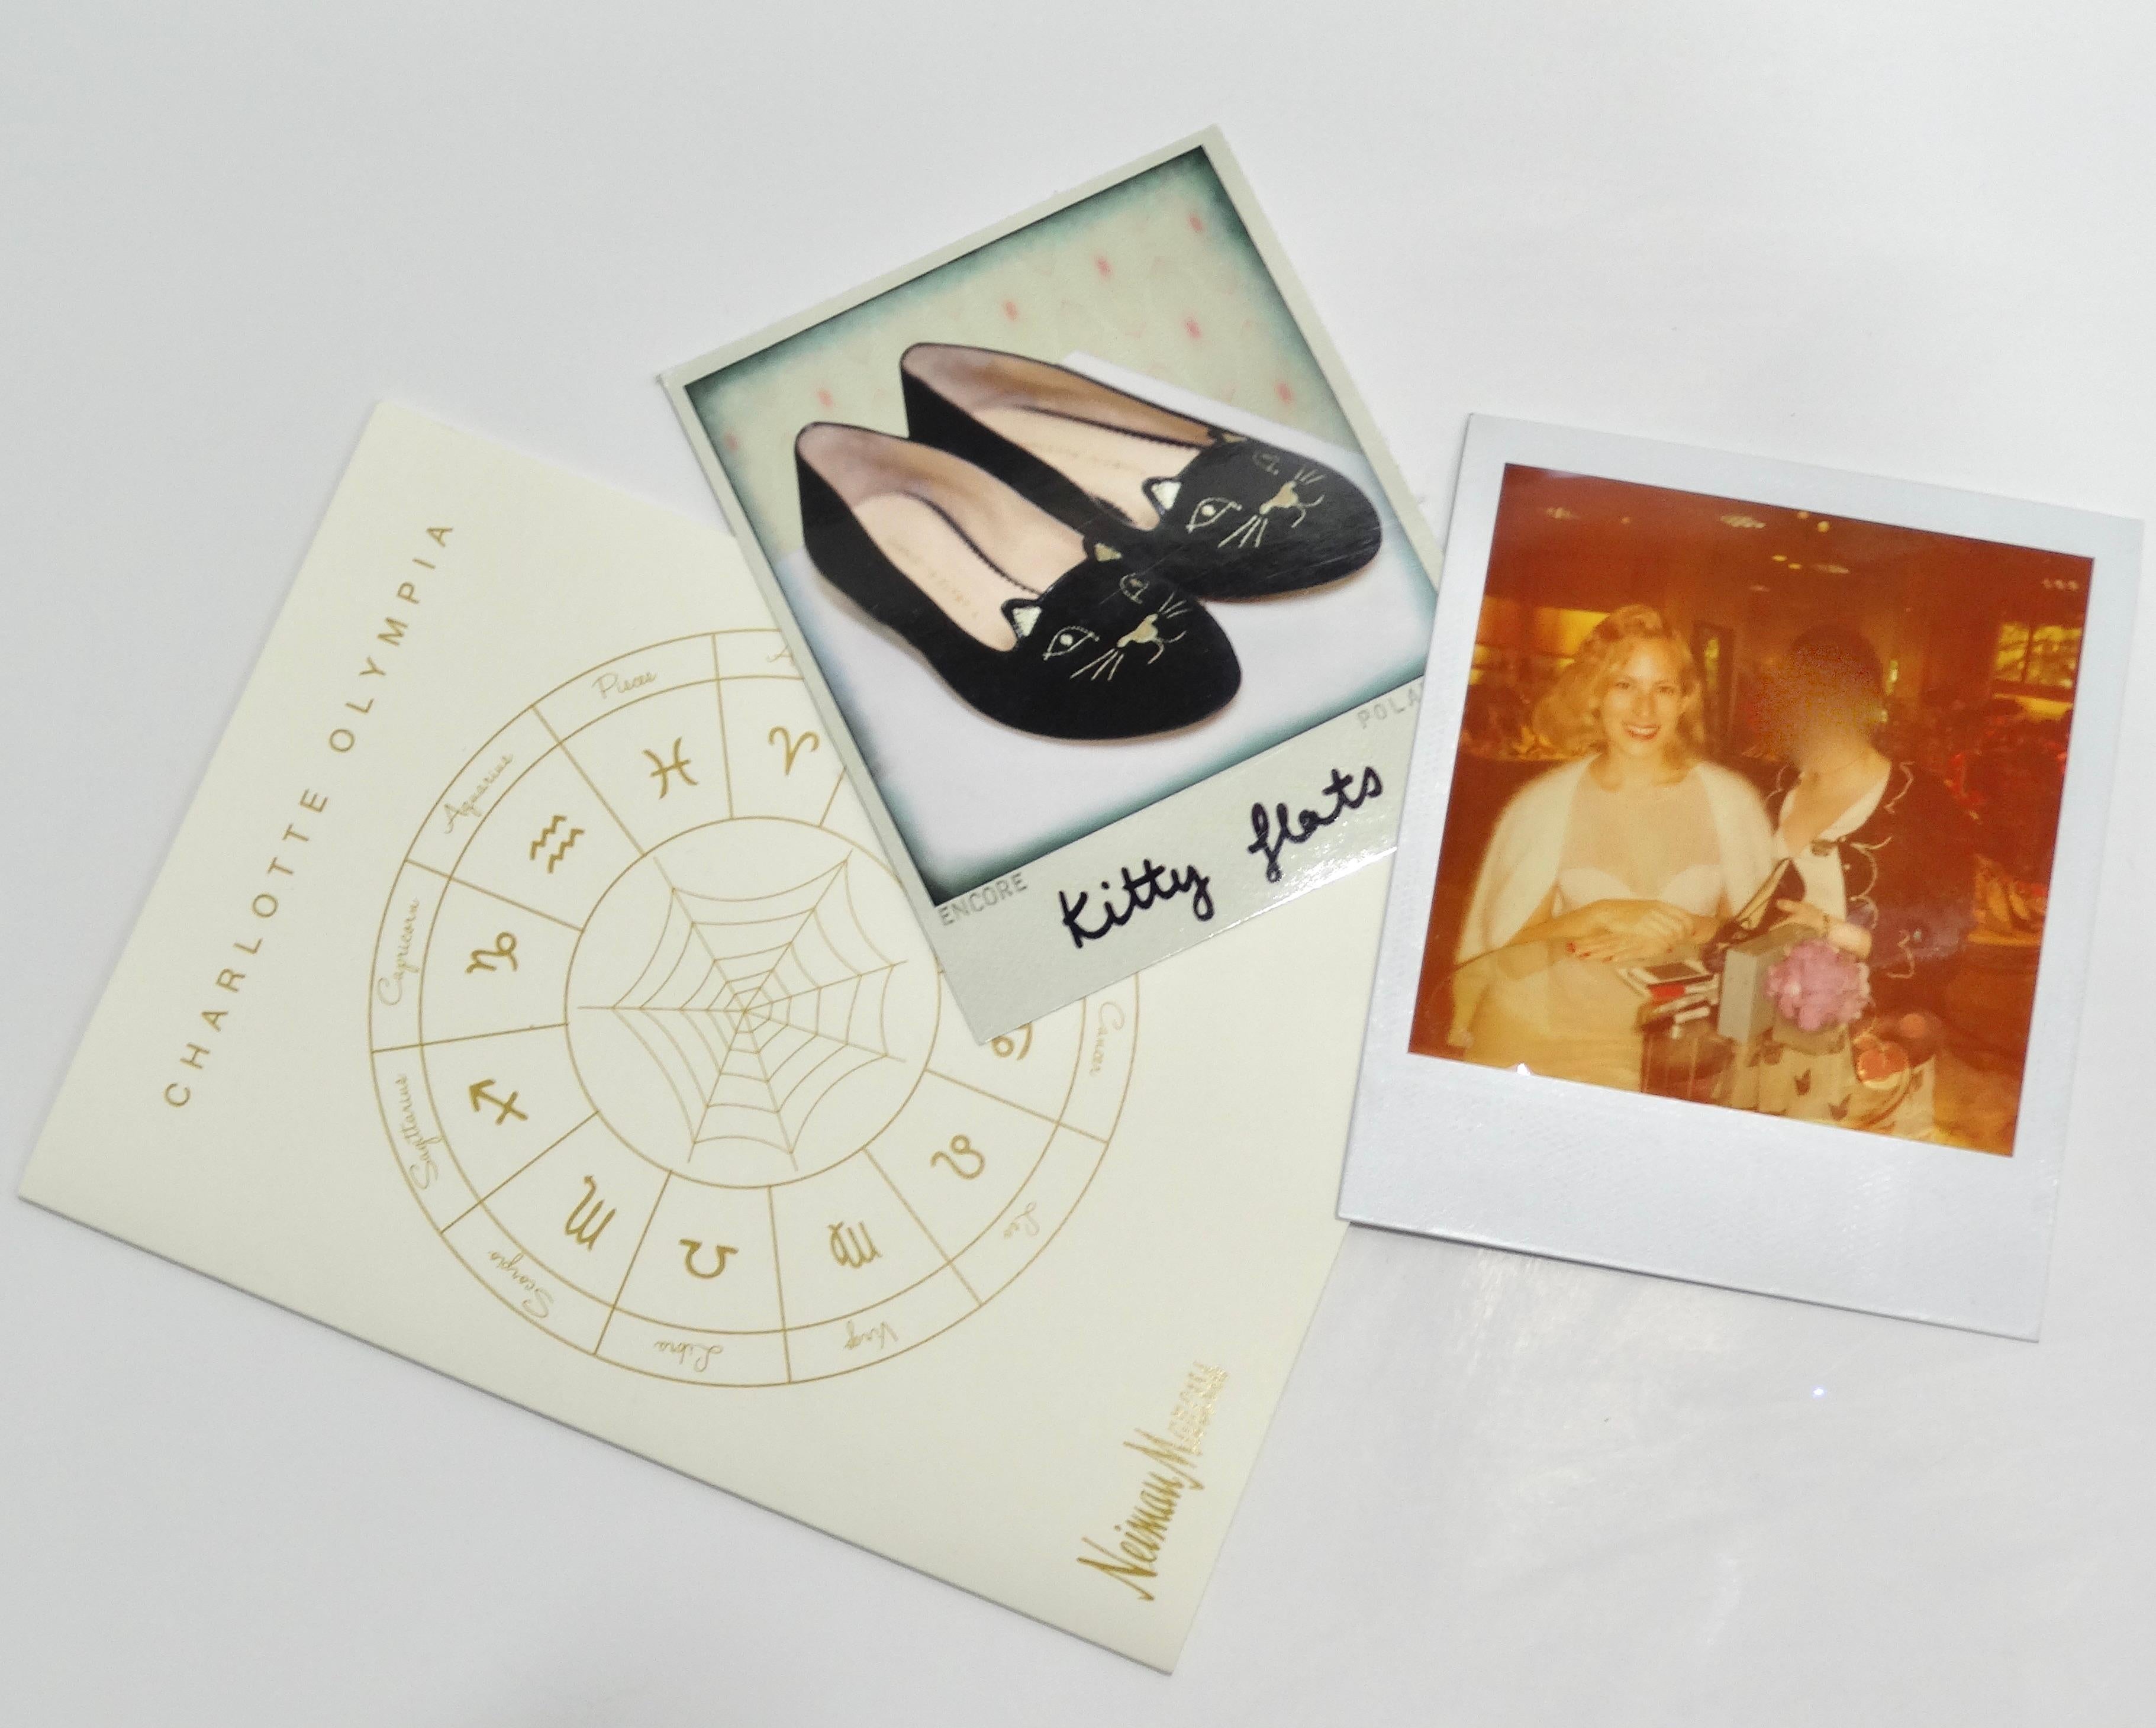 Charlotte Olympia - Chausssures brodées signées Kitty en vente 6